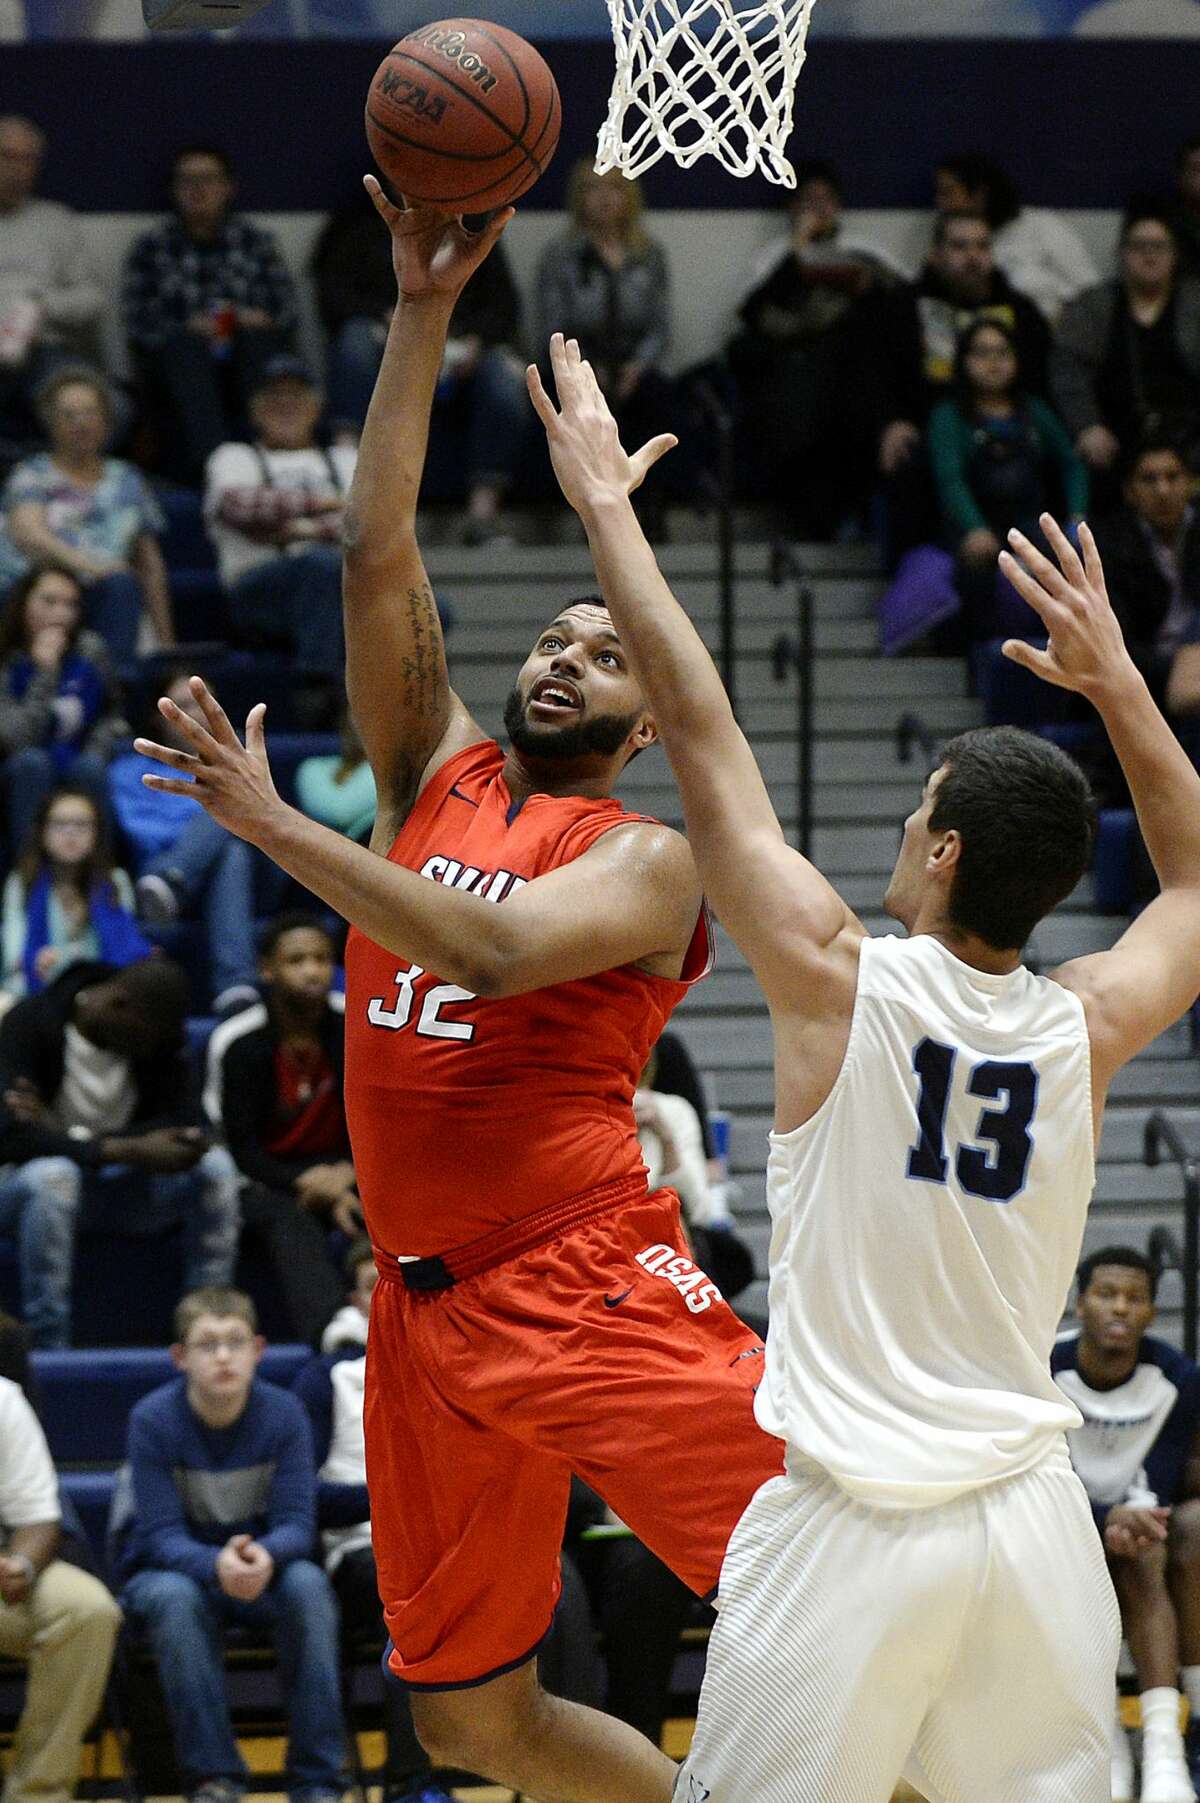 Saginaw Valley State's Devin Dixon, left, shoots as Northwood's David Jelinek defends during the first half on Saturday at Riepma Arena on the NU campus. Northwood won 64-63.